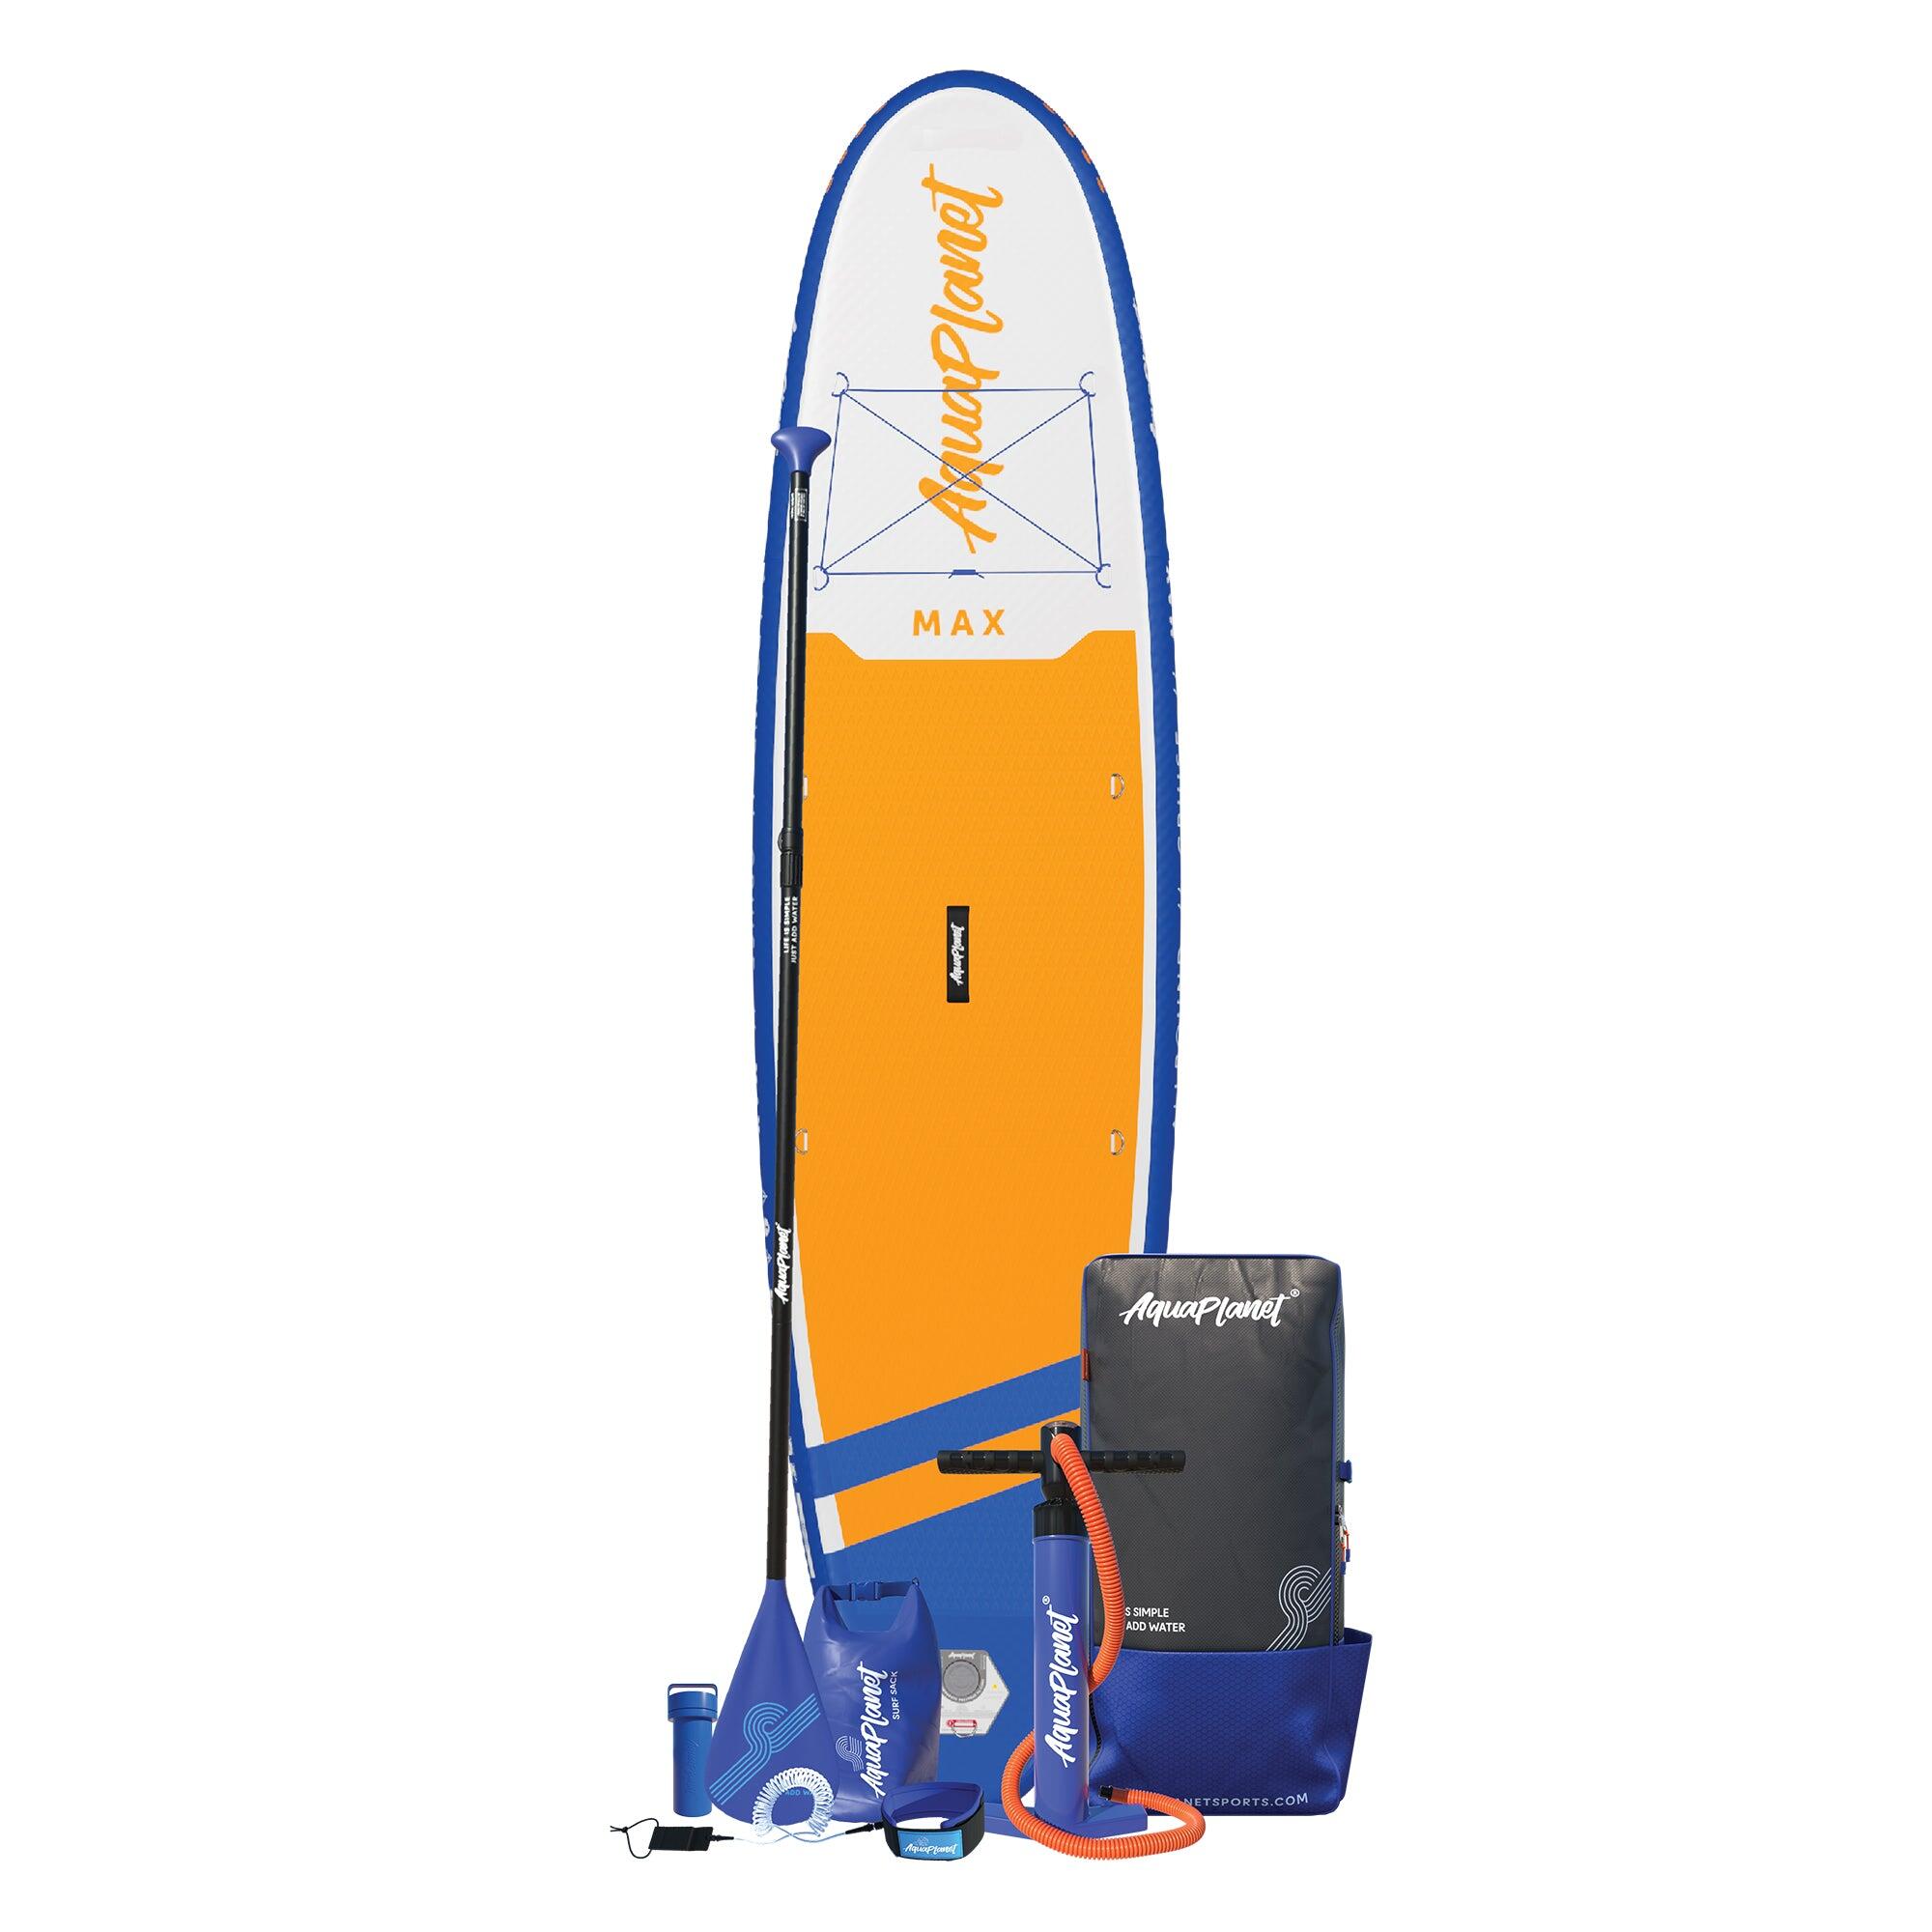 Aquaplanet MAX 10'6 Inflatable Paddle Board Package - Orange 2/5